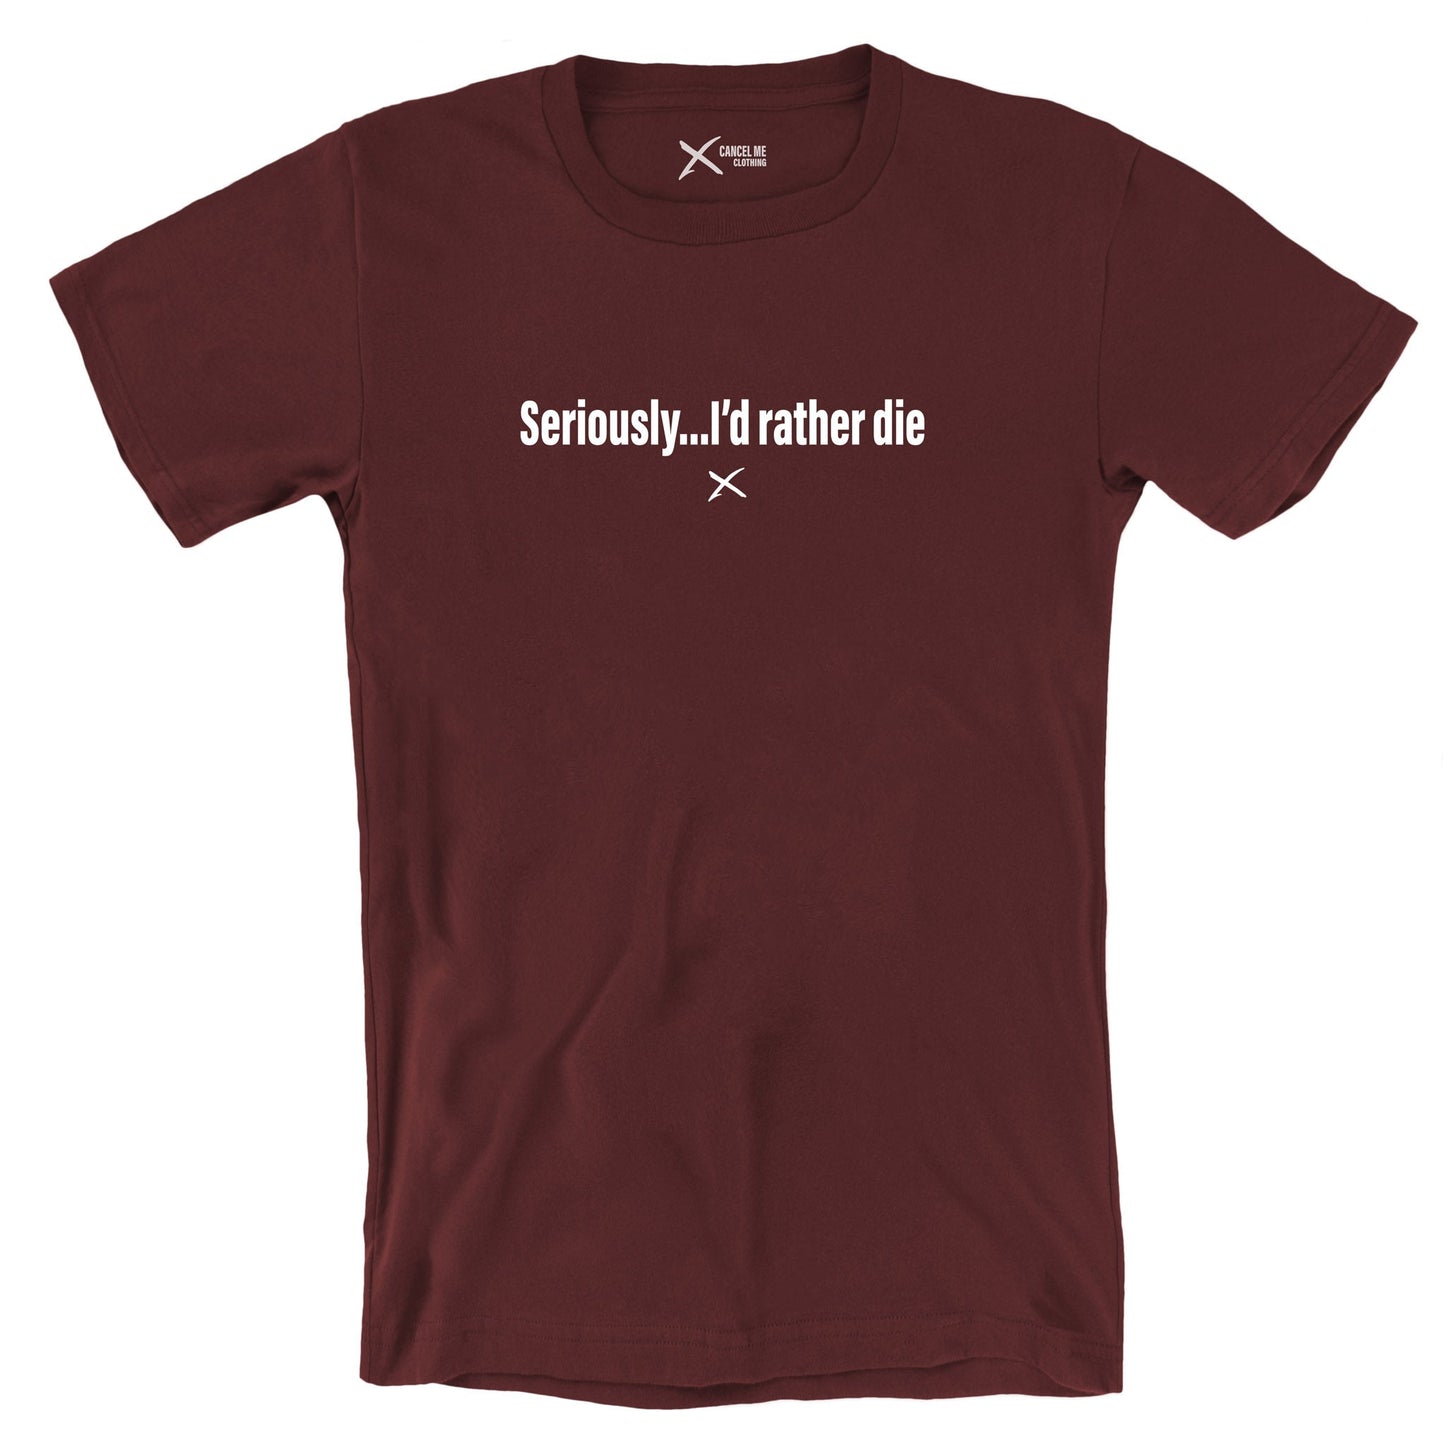 Seriously...I'd rather die - Shirt